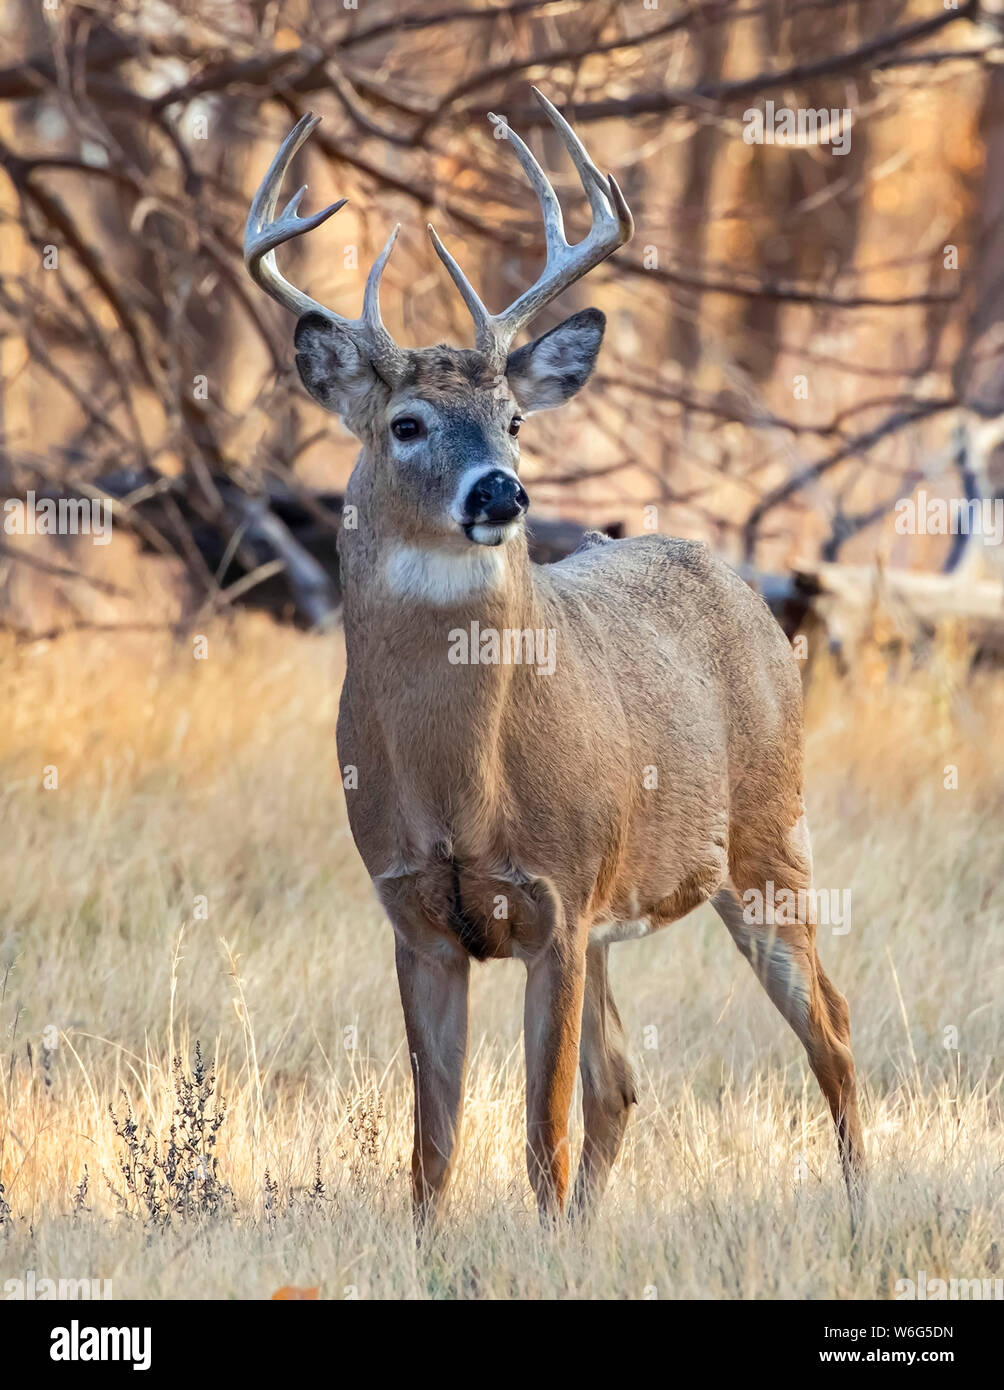 White-tailed deer (Odocoileus virginianus) buck standing in a grass field; Denver, Colorado, United States of America Stock Photo